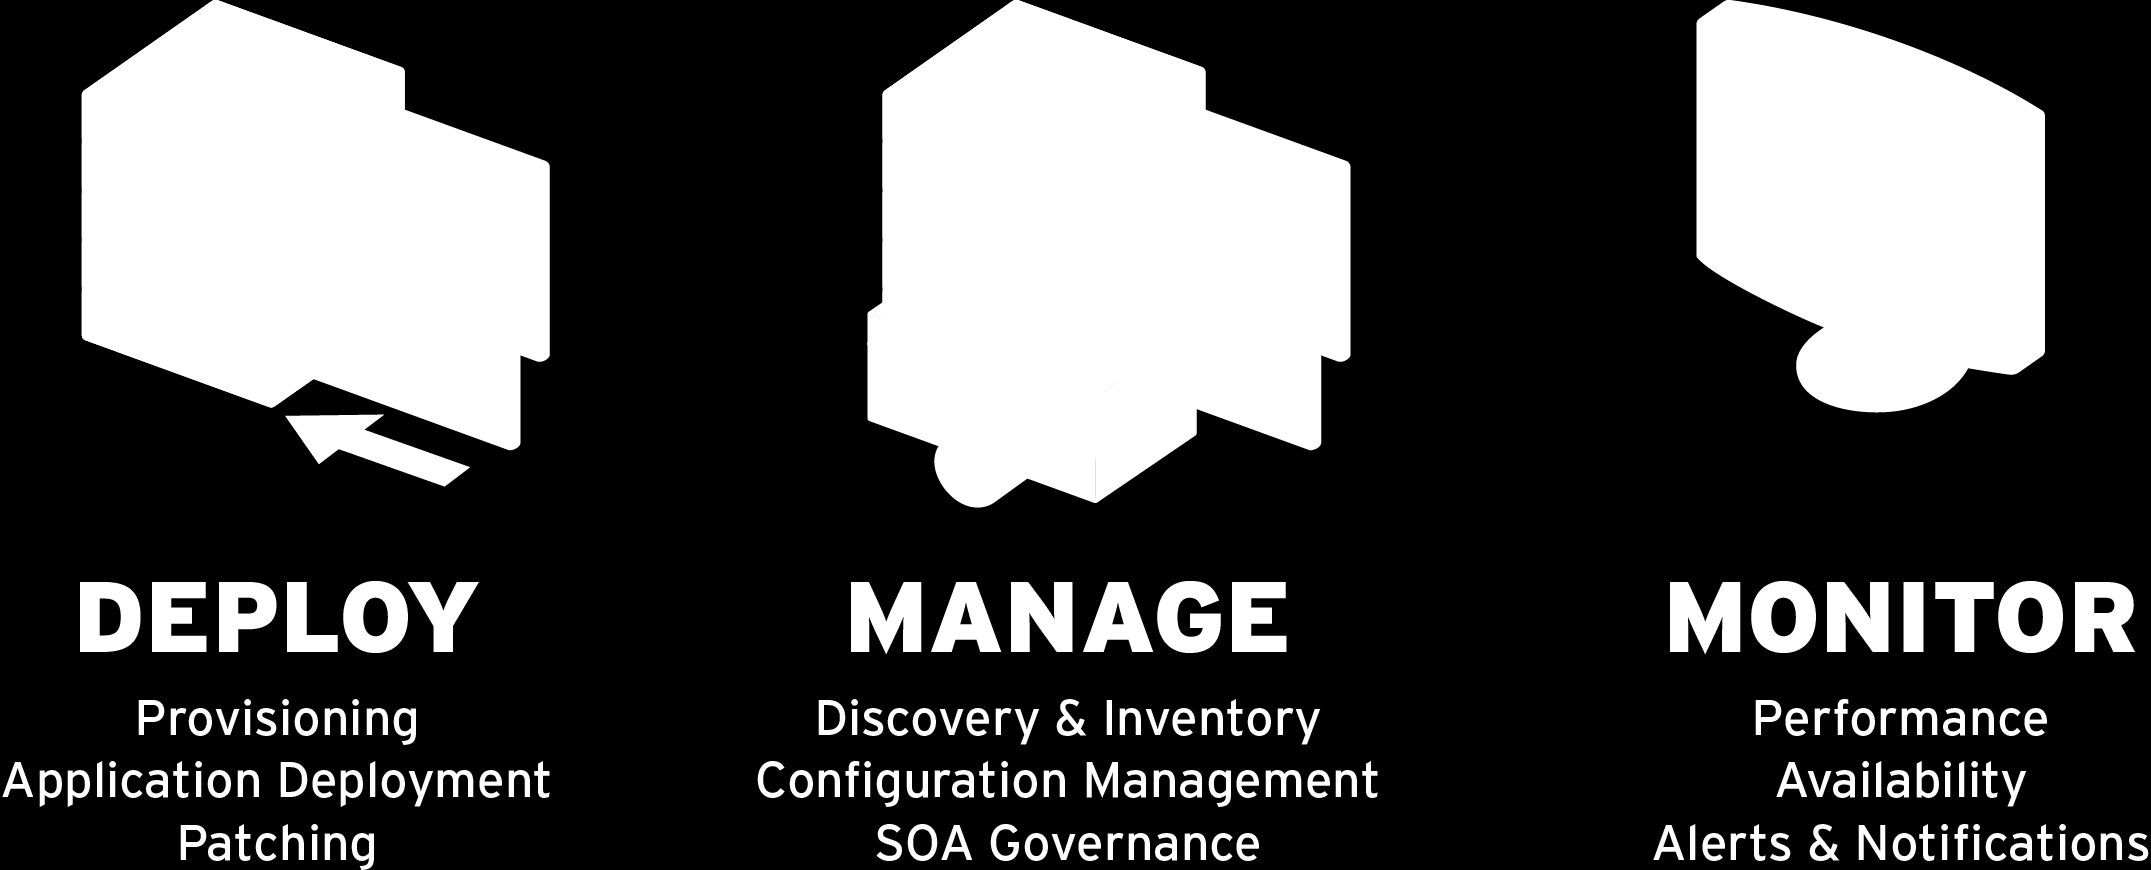 MANAGE JBOSS MIDDLEWARE & APPLICATIONS WITH JBOSS